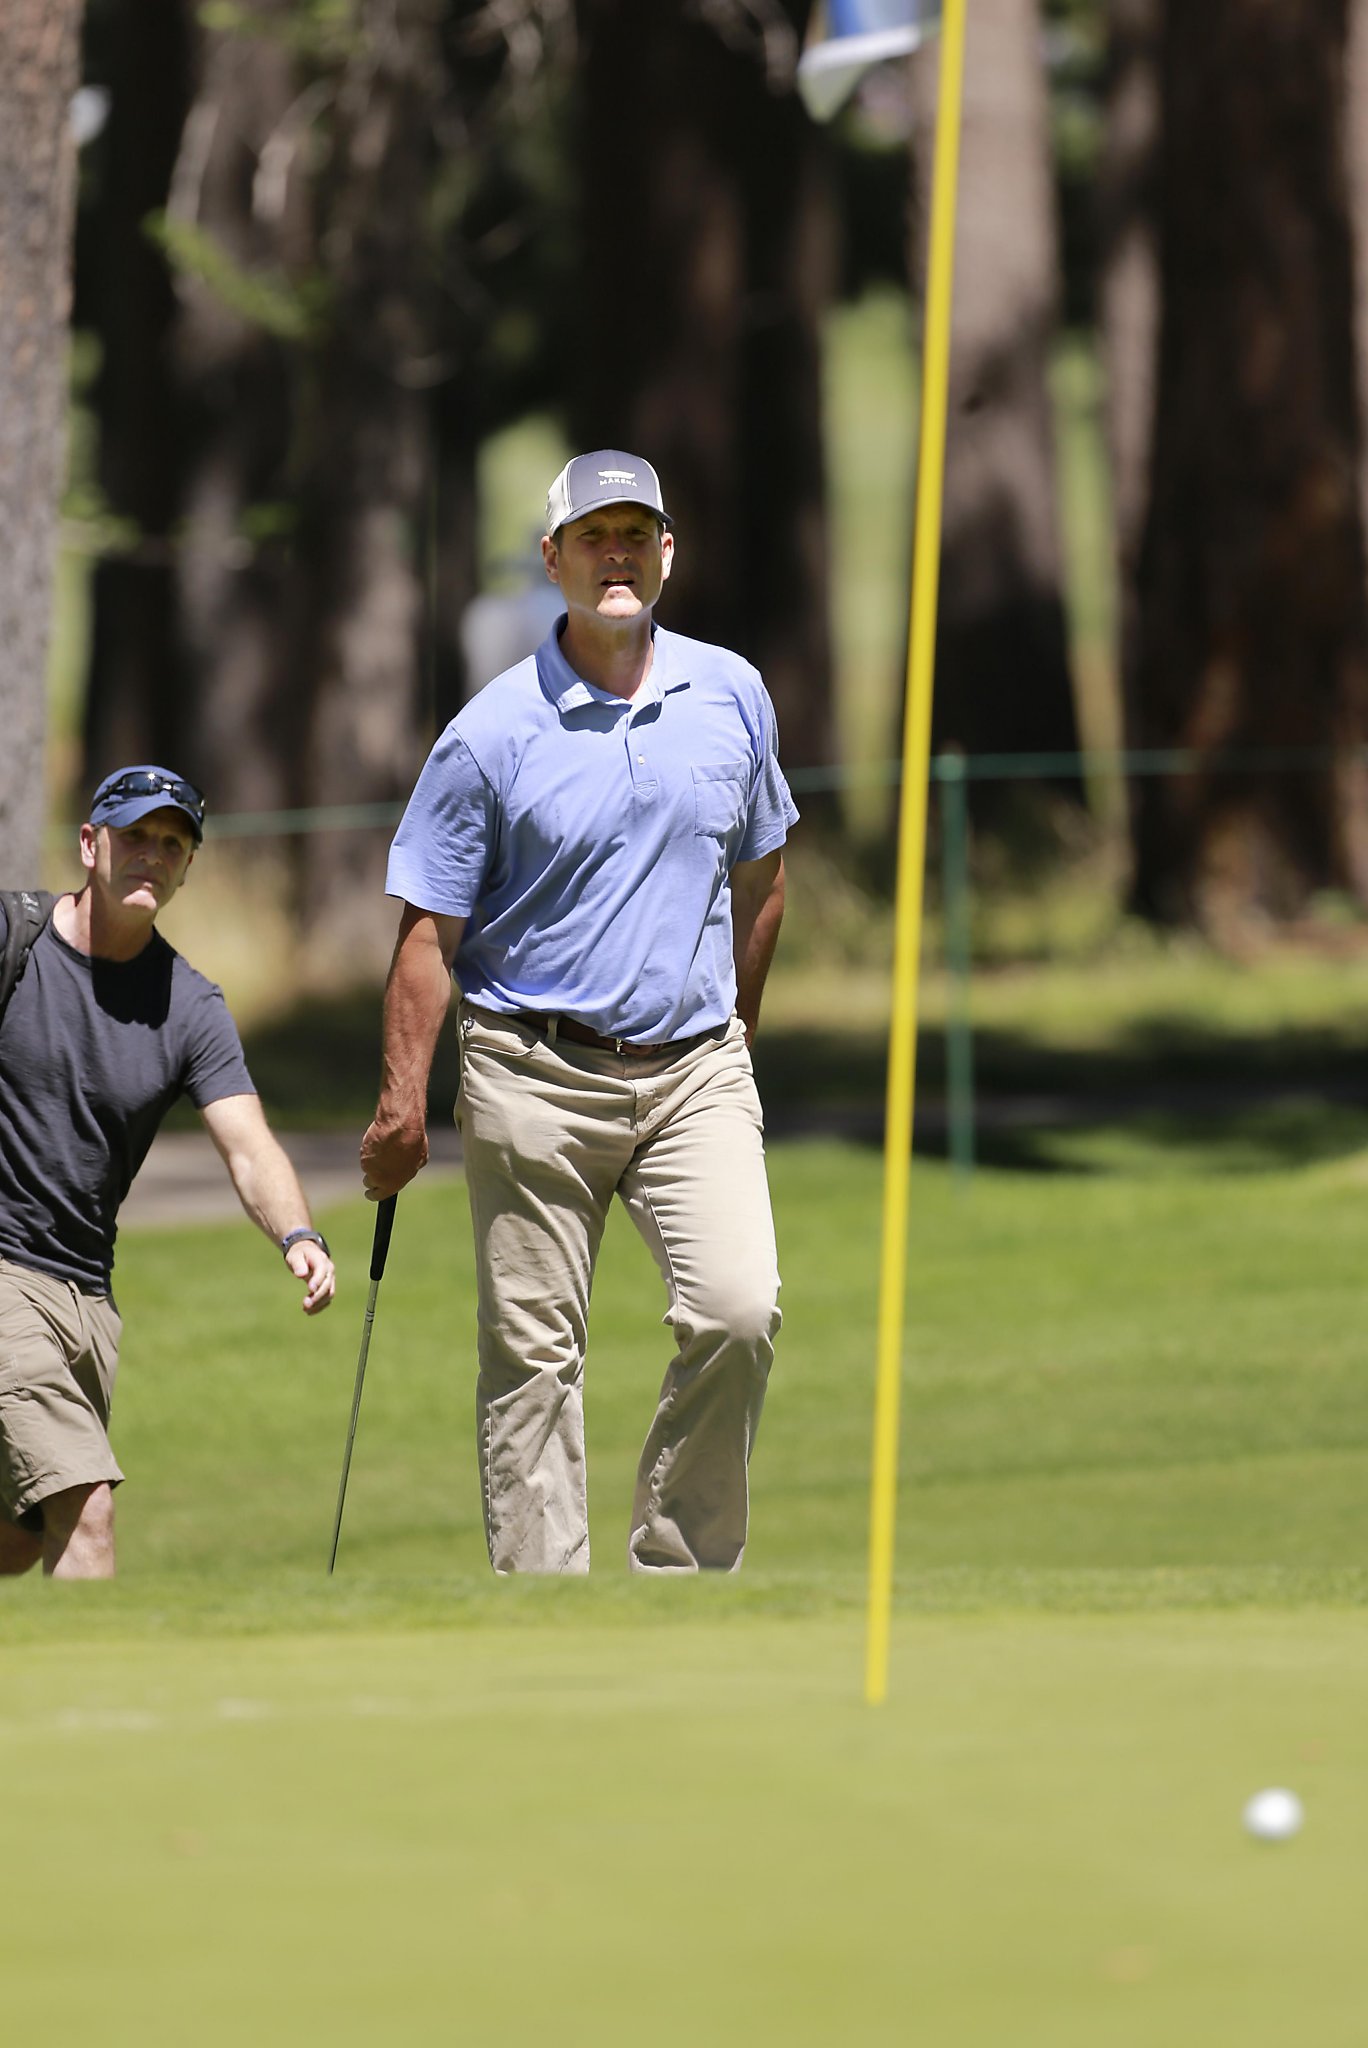 Curry, Timberlake team up, electrify Tahoe celebrity golf tourney pic photo photo